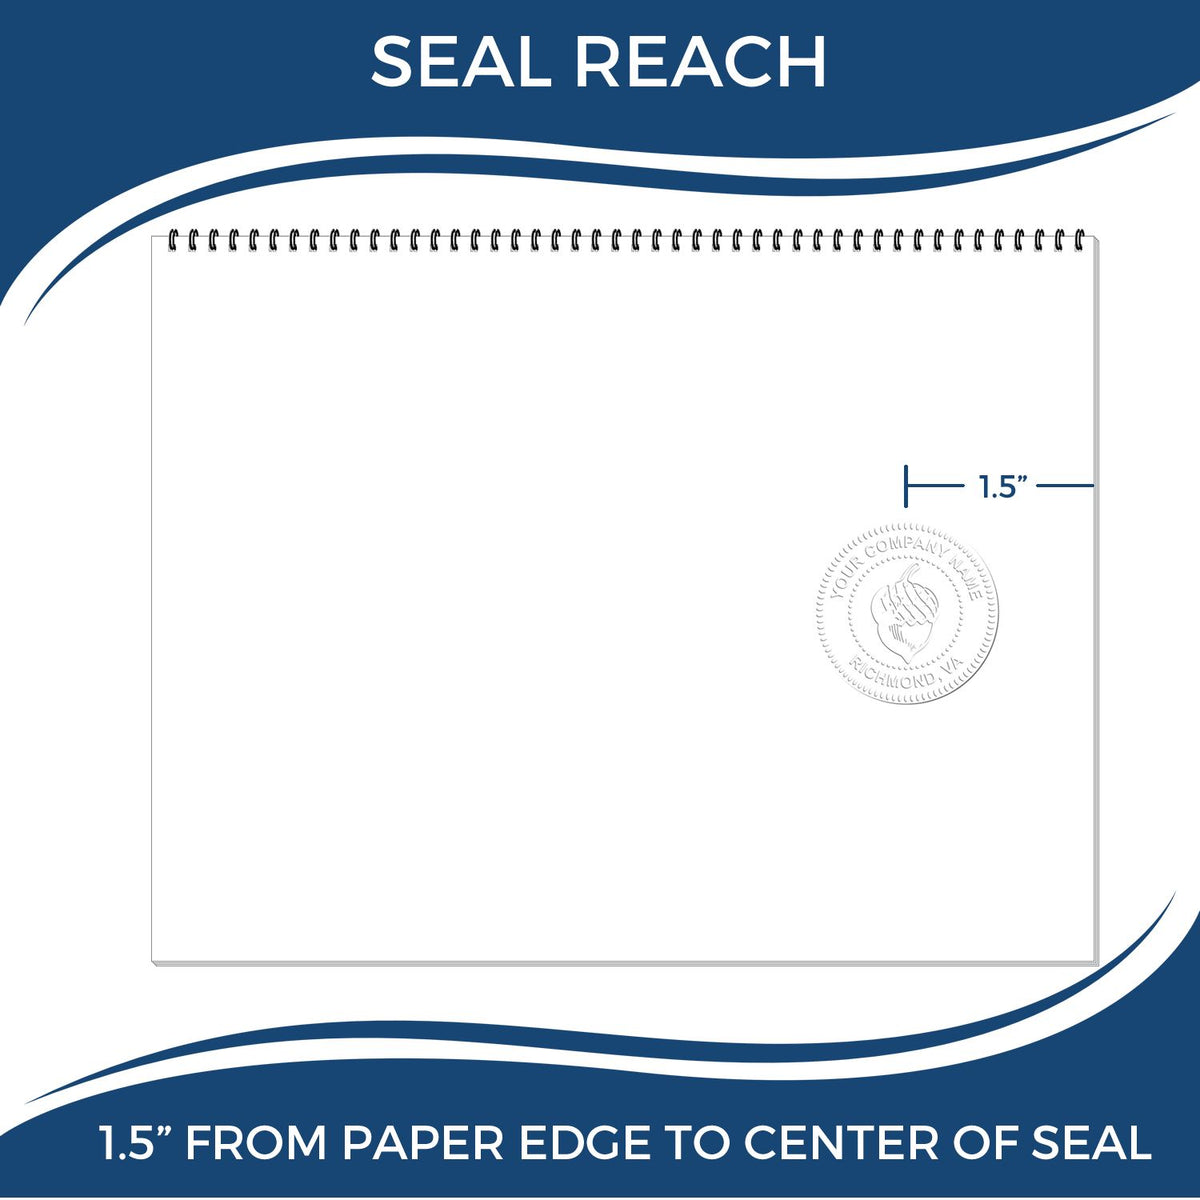 An infographic showing the seal reach which is represented by a ruler and a miniature seal image of the State of Guam Architectural Seal Embosser